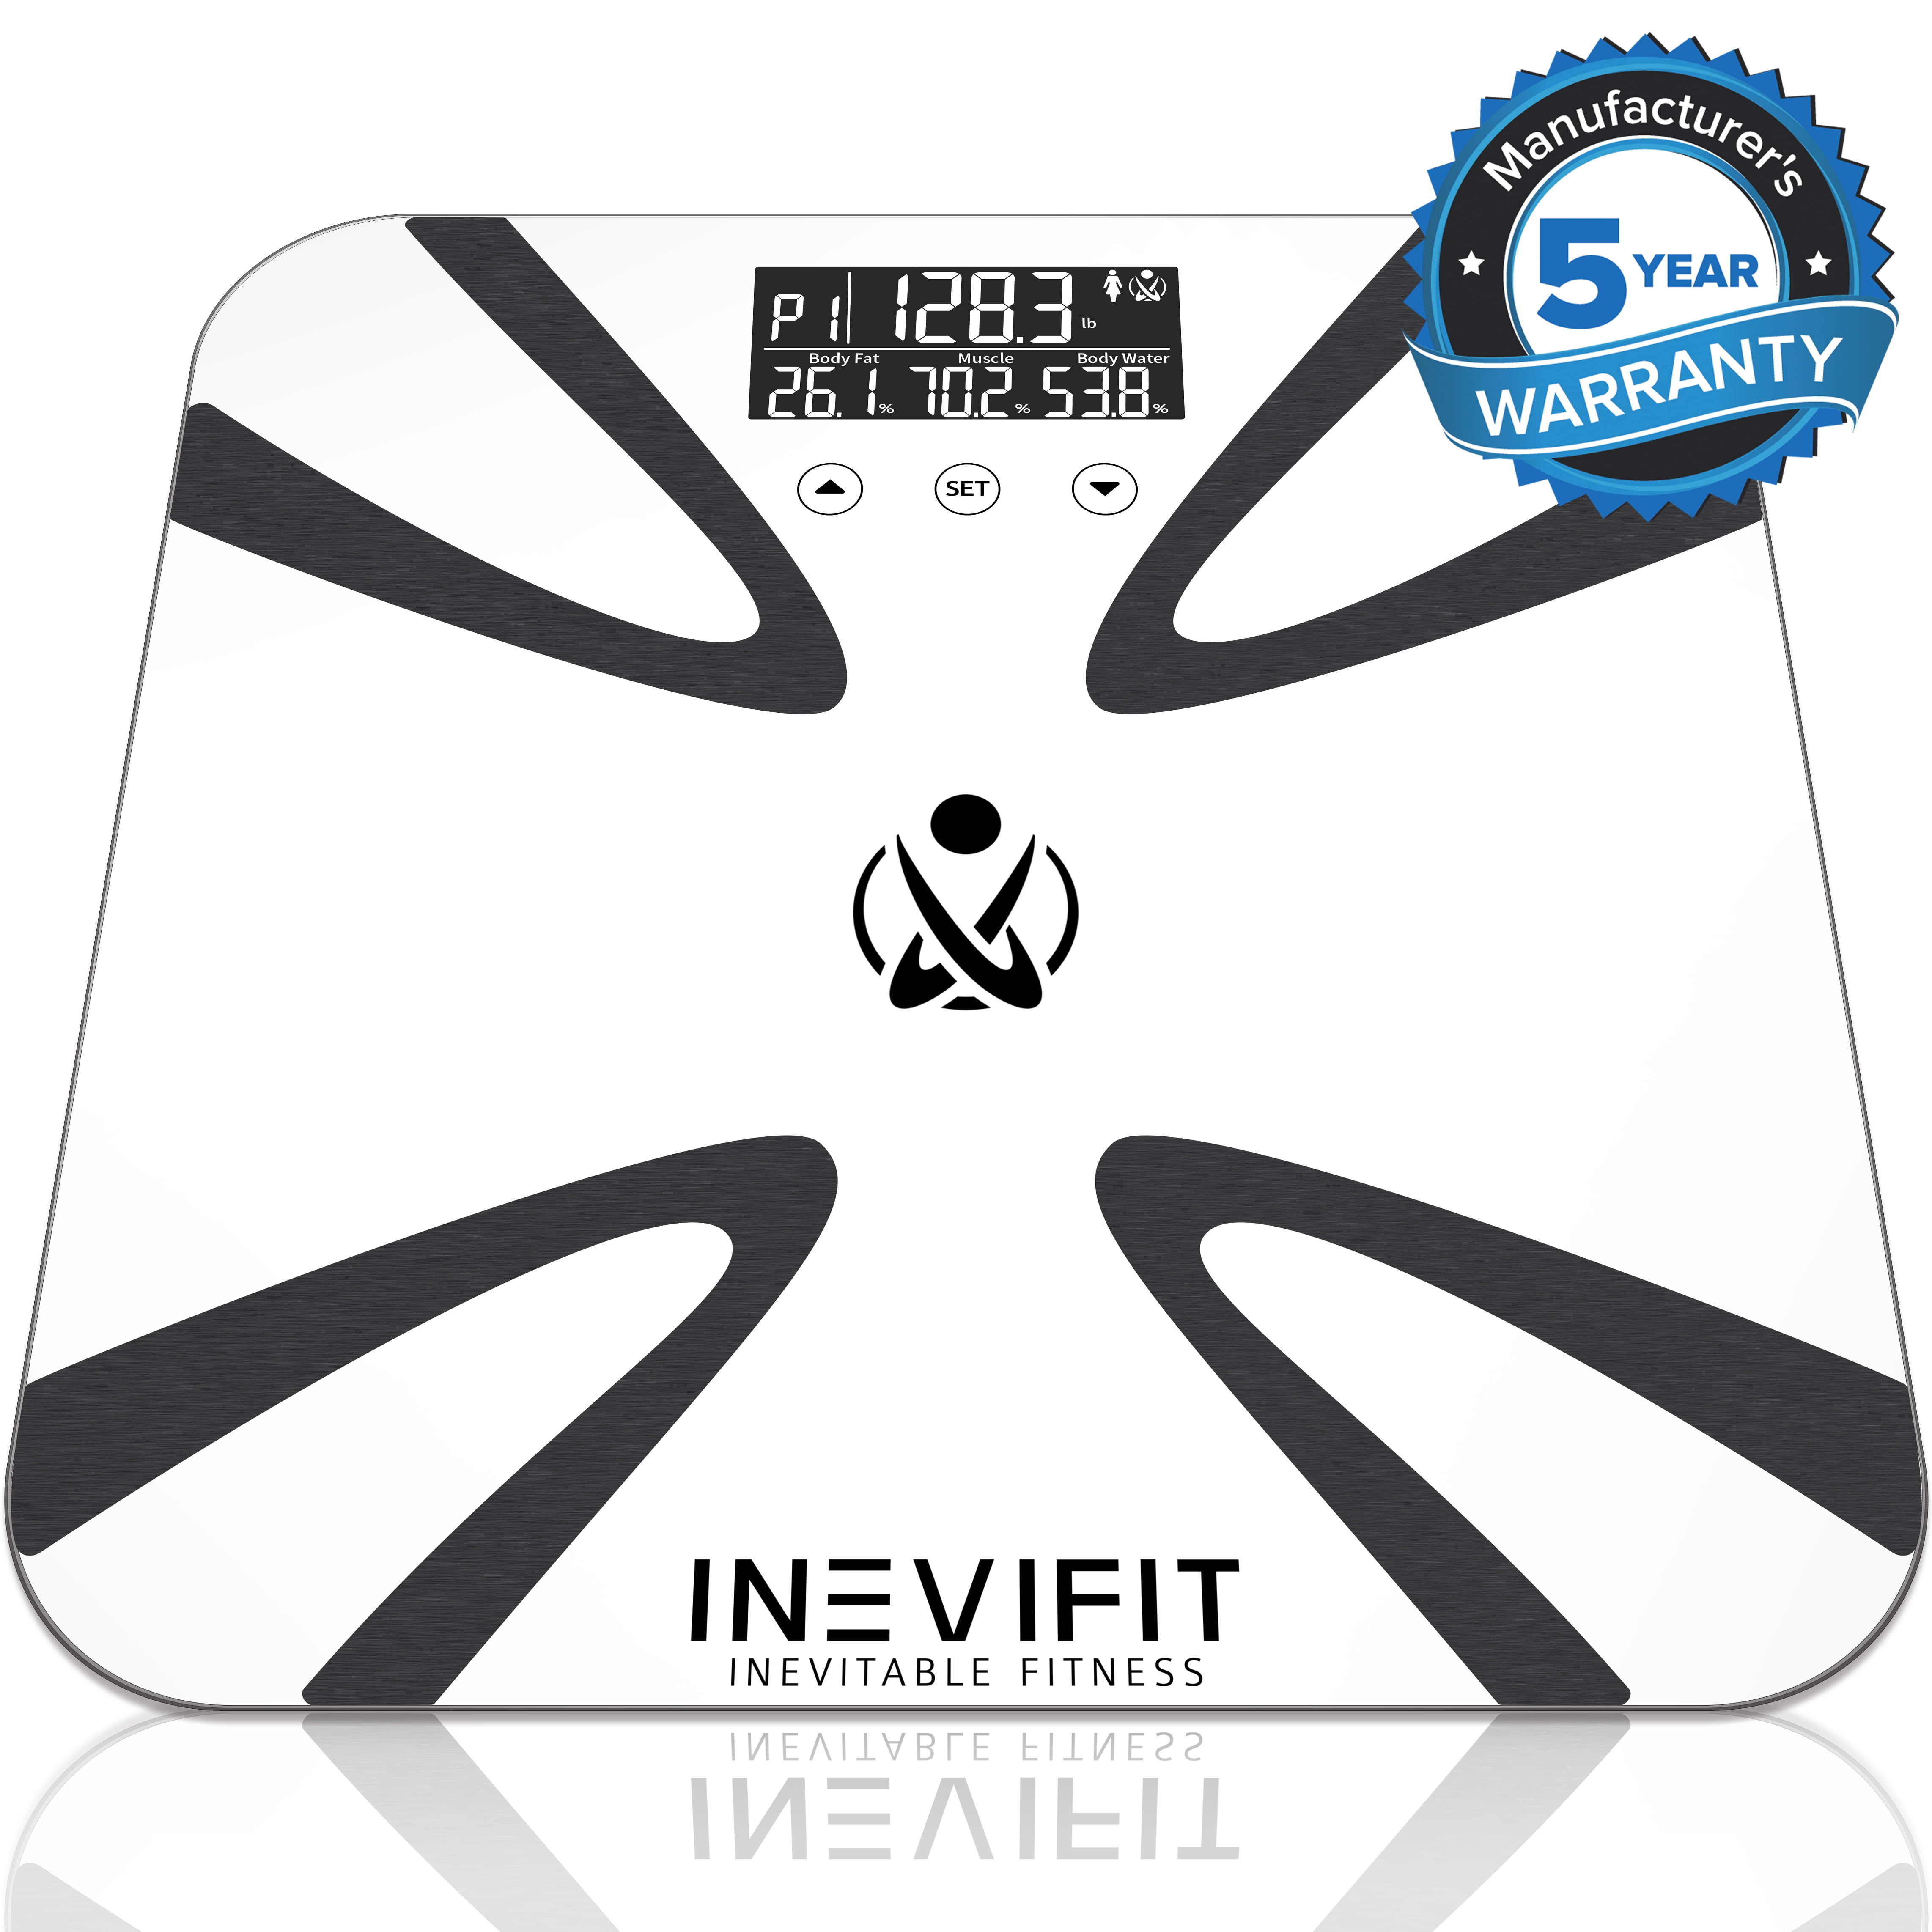 INEVIFIT Body-Analyzer Scale, Highly Accurate Digital Bathroom Body  Composition Analyzer, Measures Weight, Body Fat, Water, Muscle, BMI,  Visceral Levels & Bone Mass for 10 Users. Includes Batteries